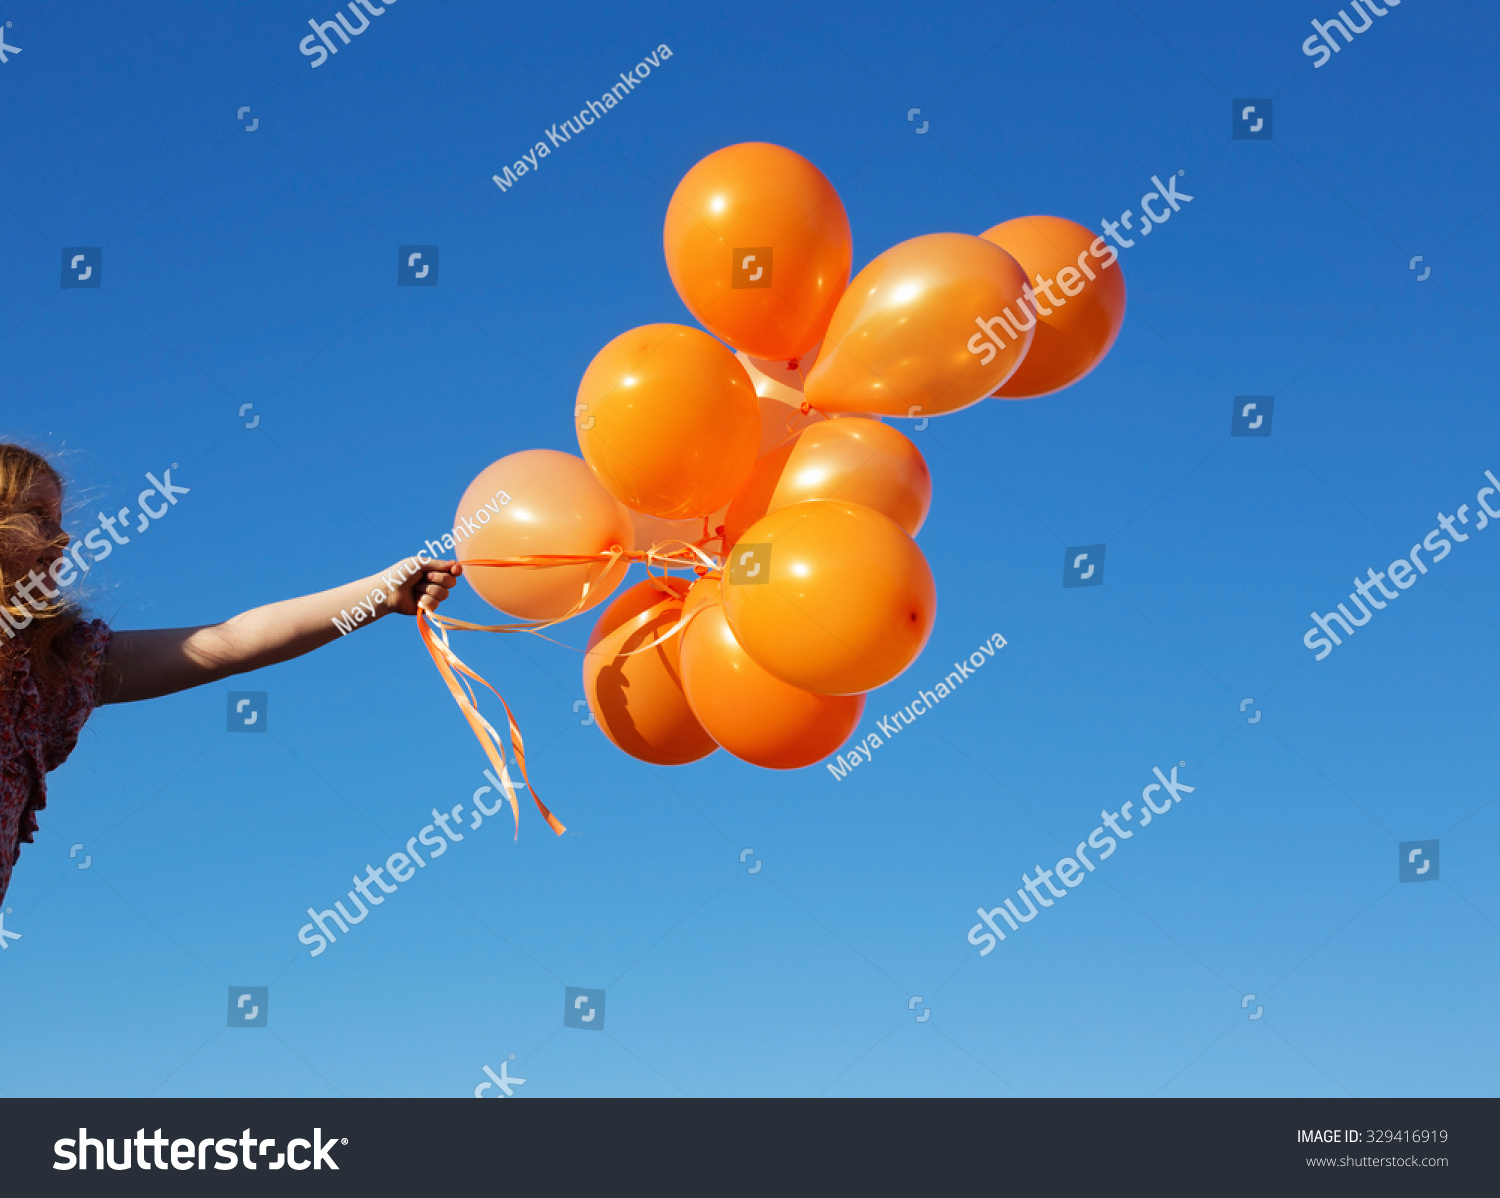 little girl outdoors with balloons #329416919